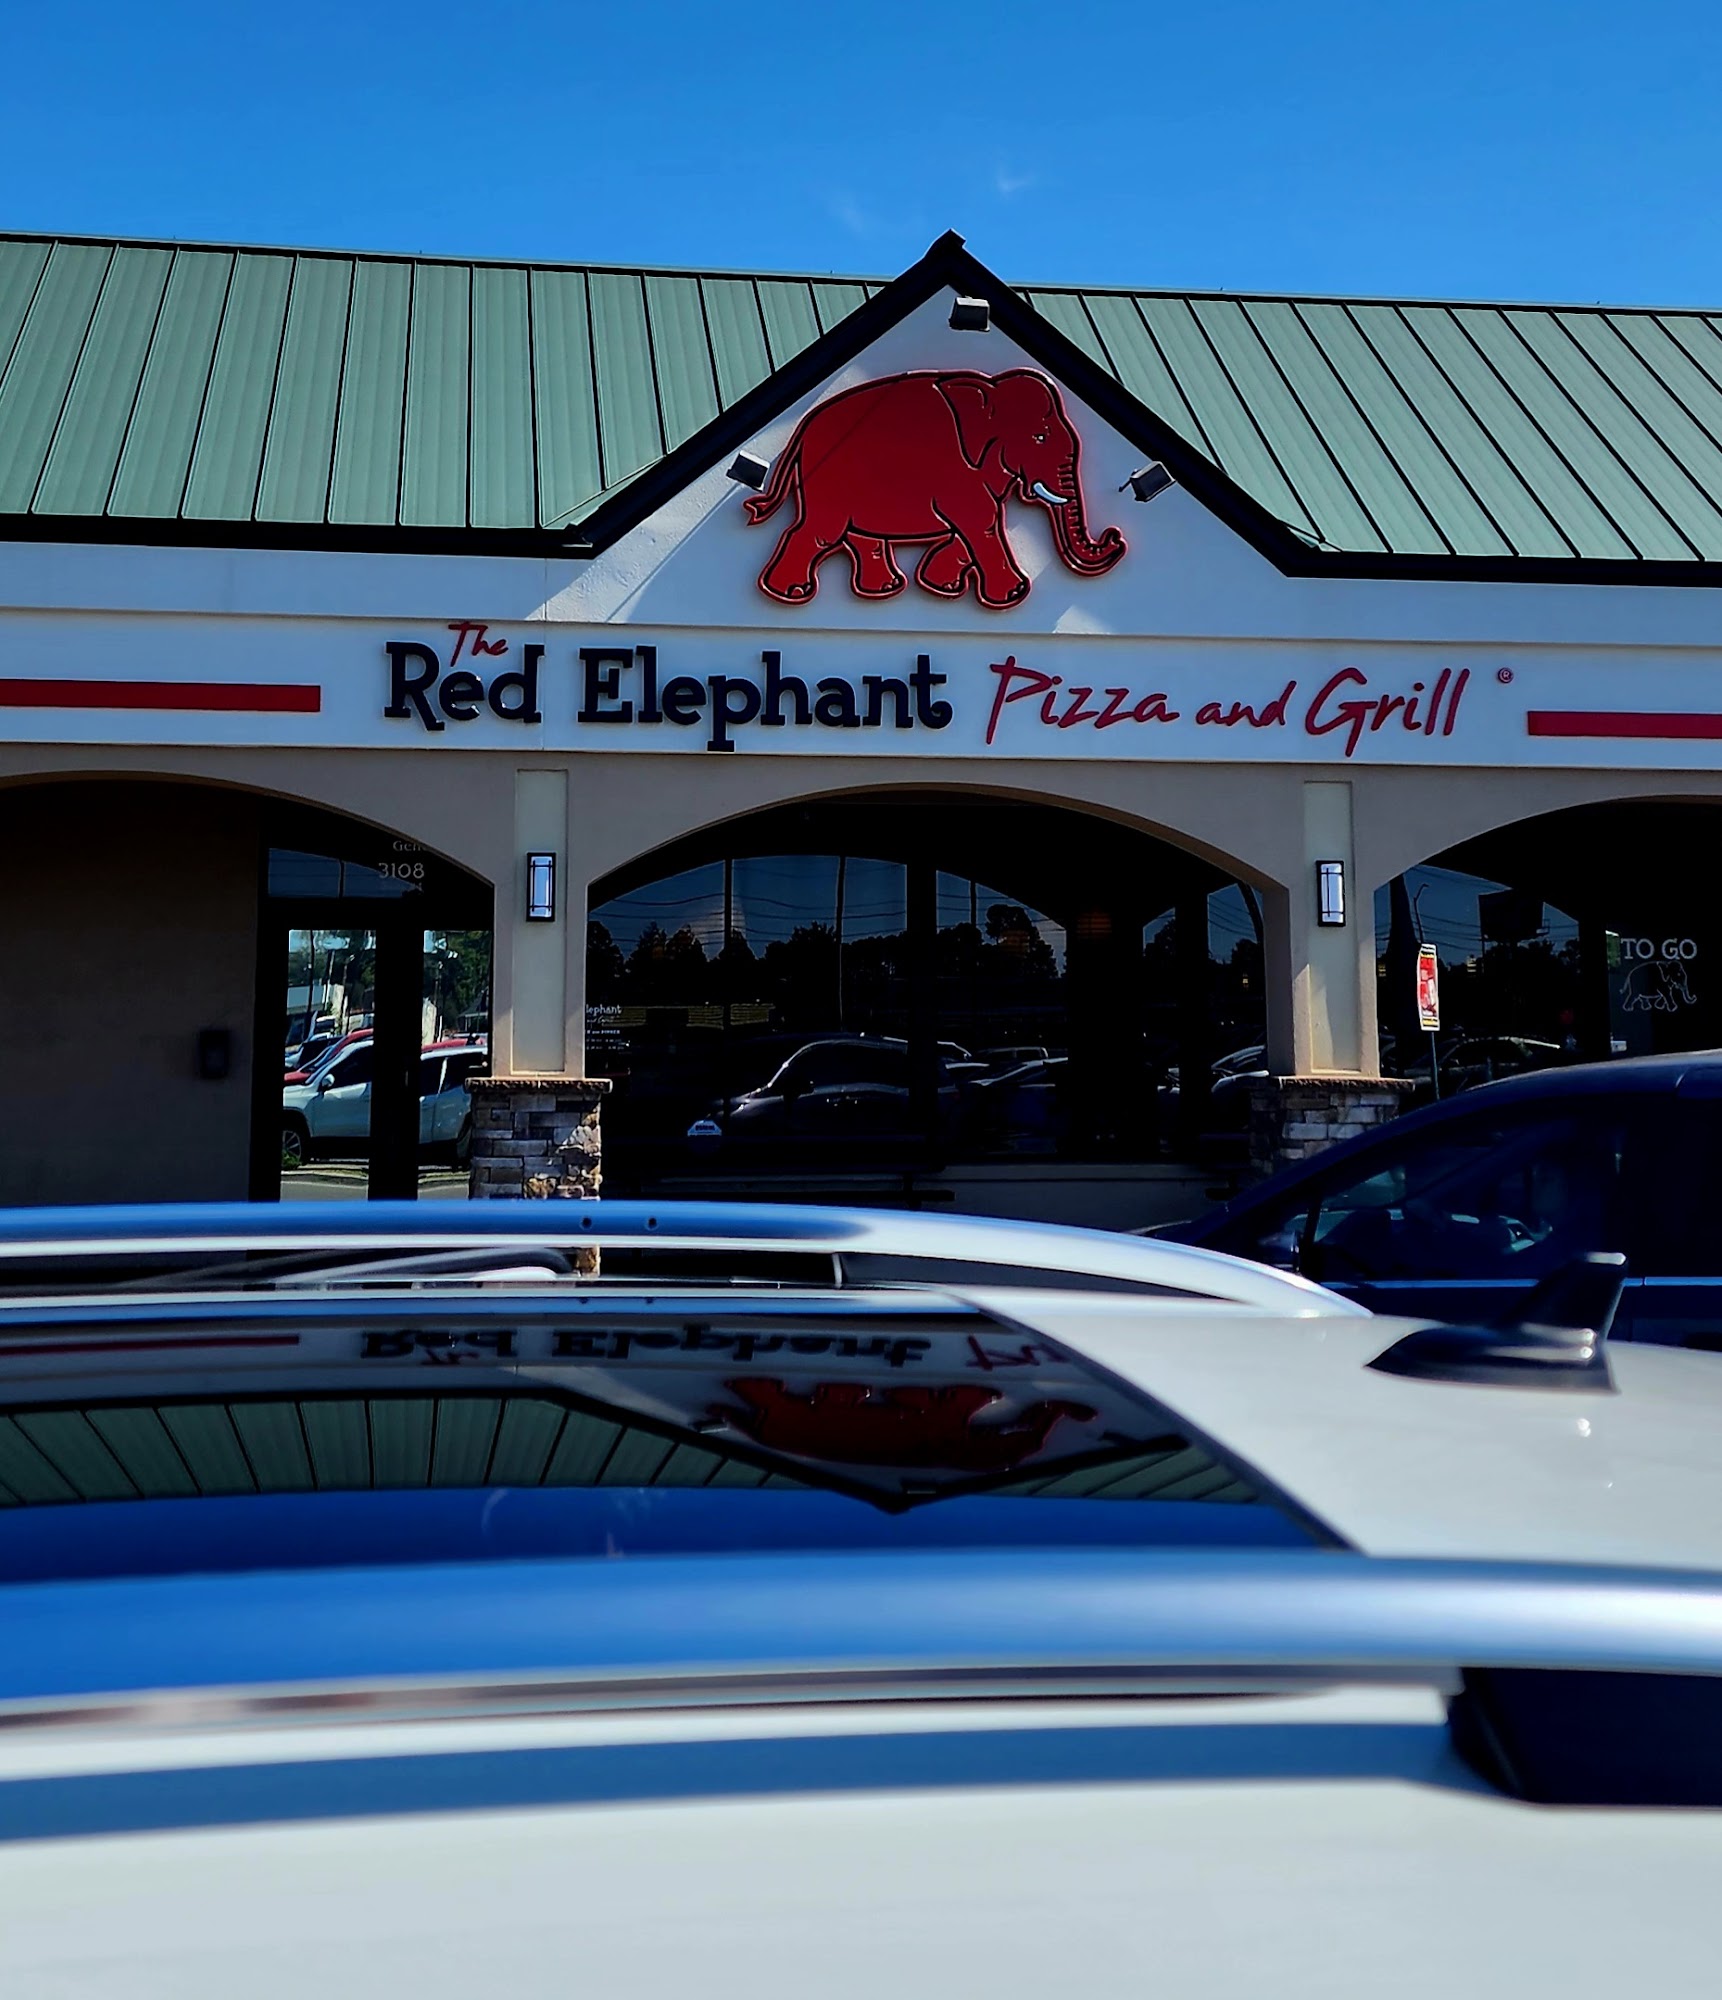 Red Elephant Pizza & Grill